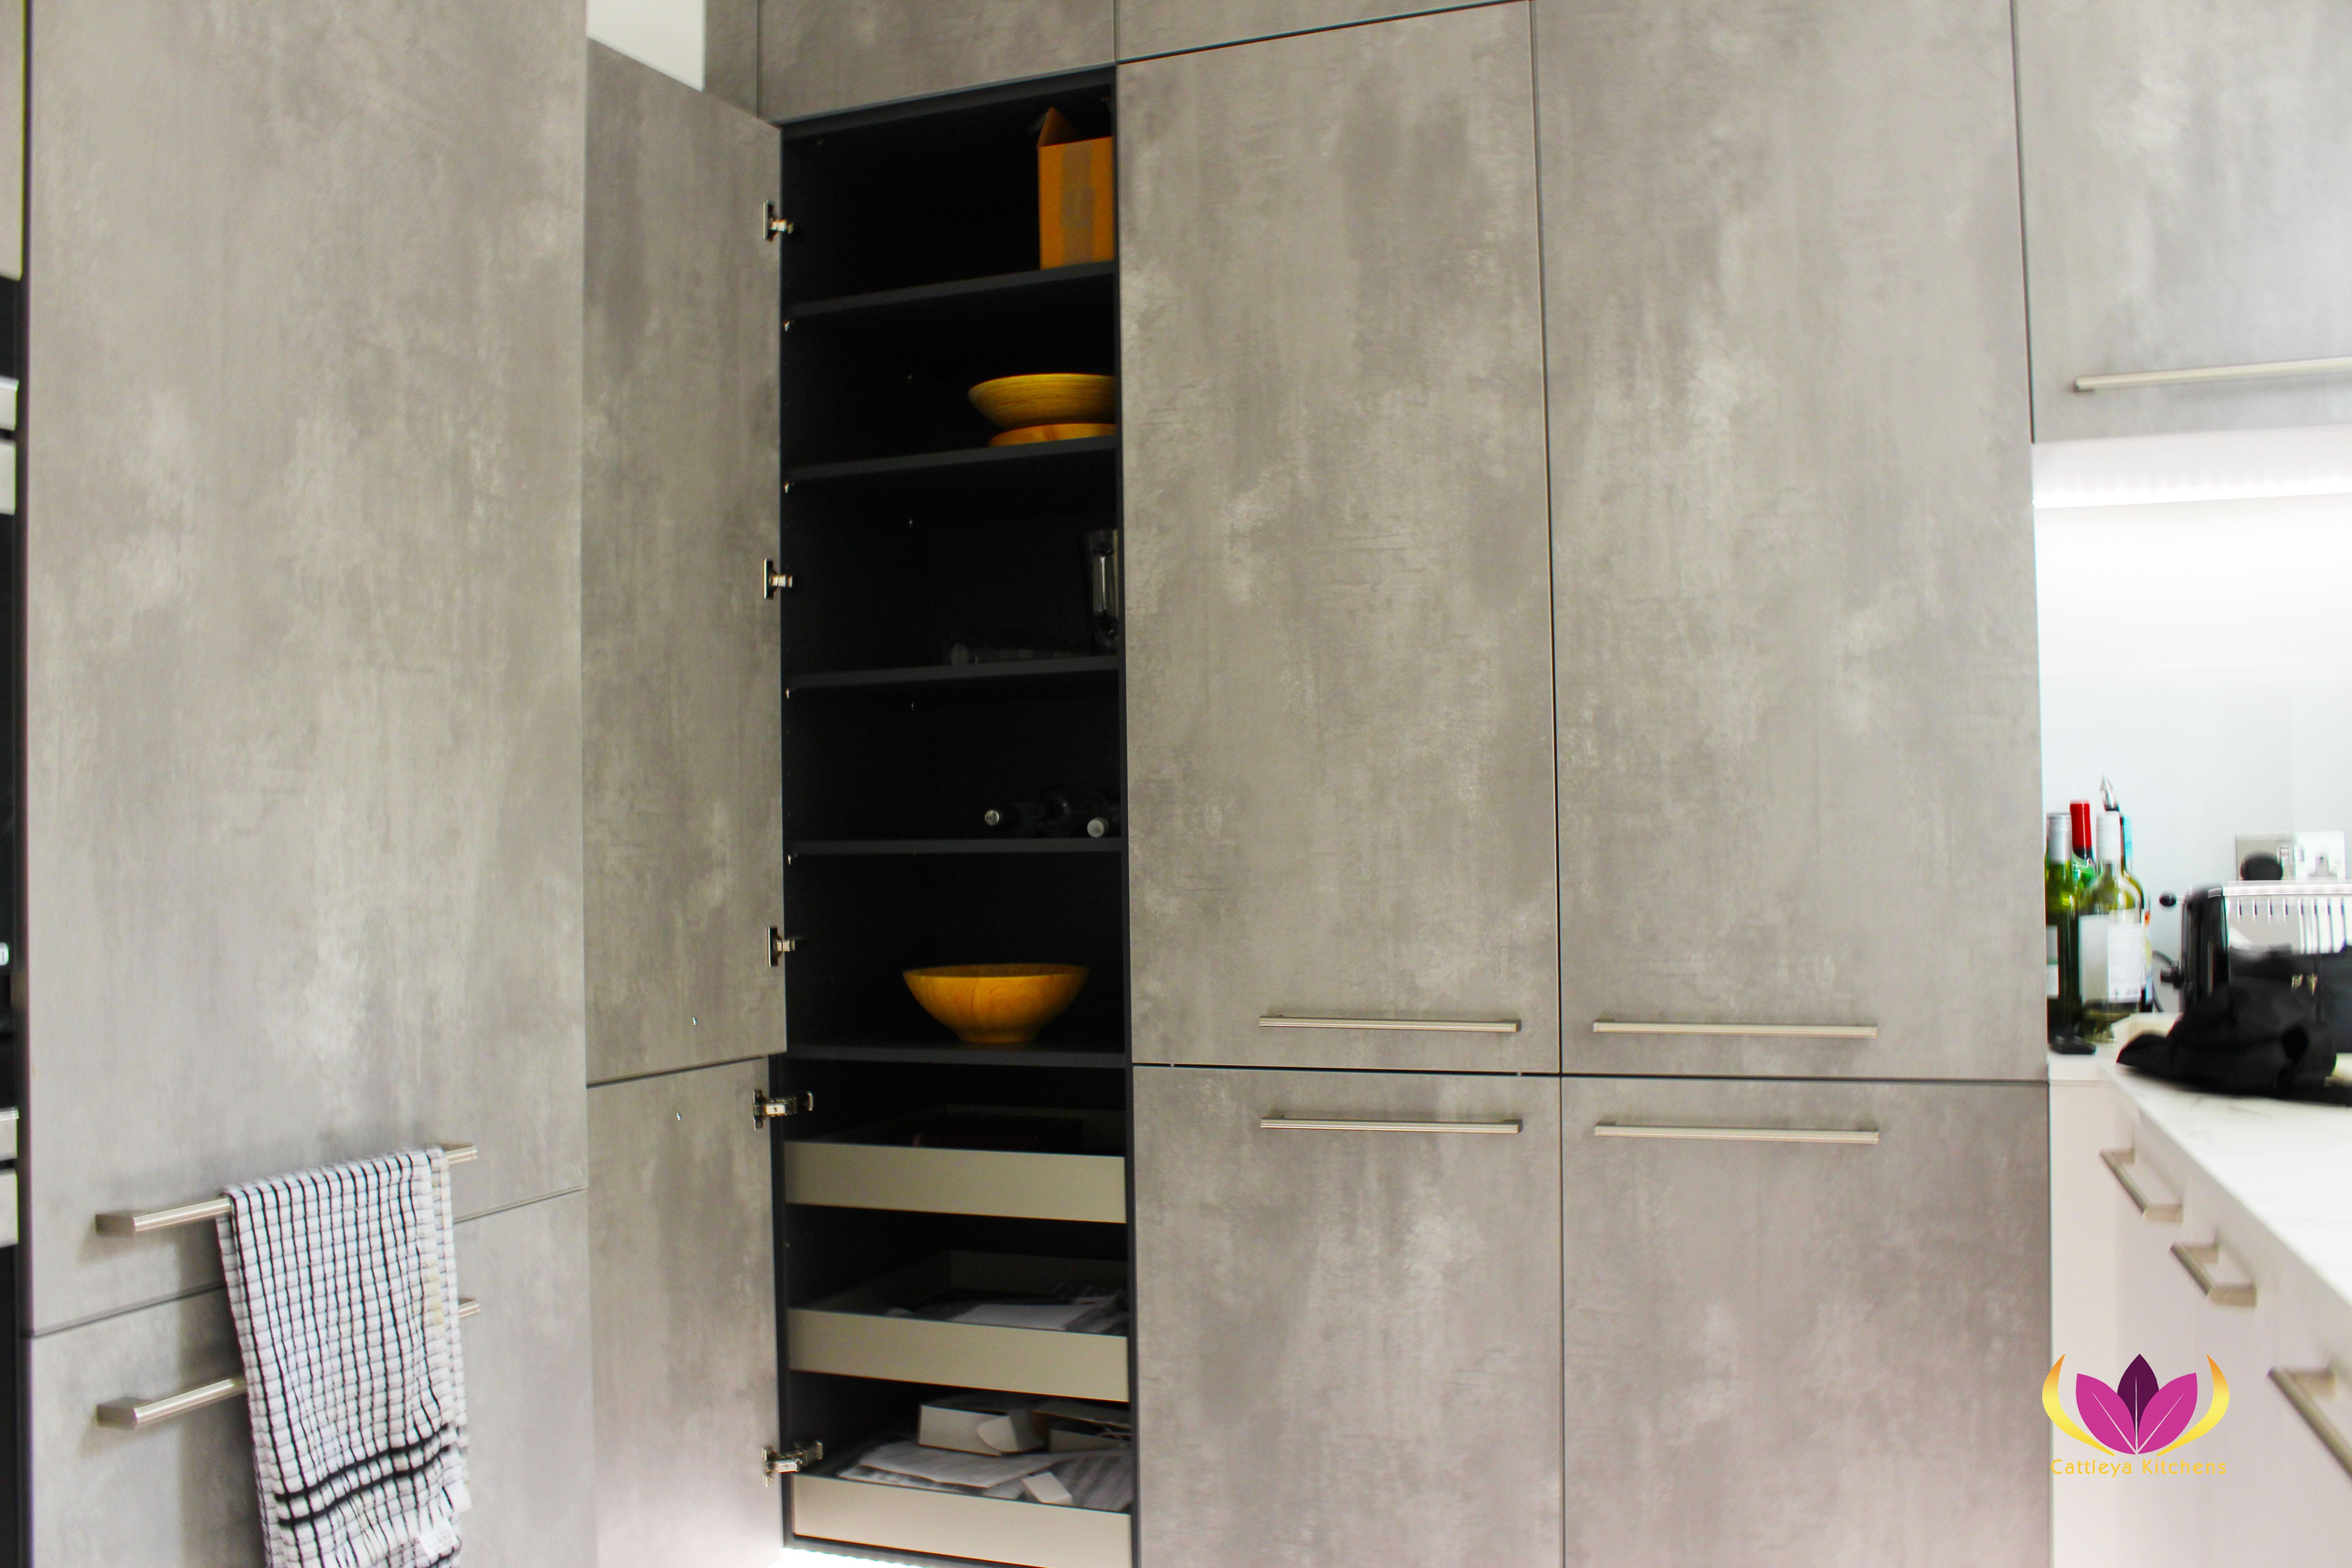 Layered shelves tall cabinet units - Belsize Park Finished Kitchen Project